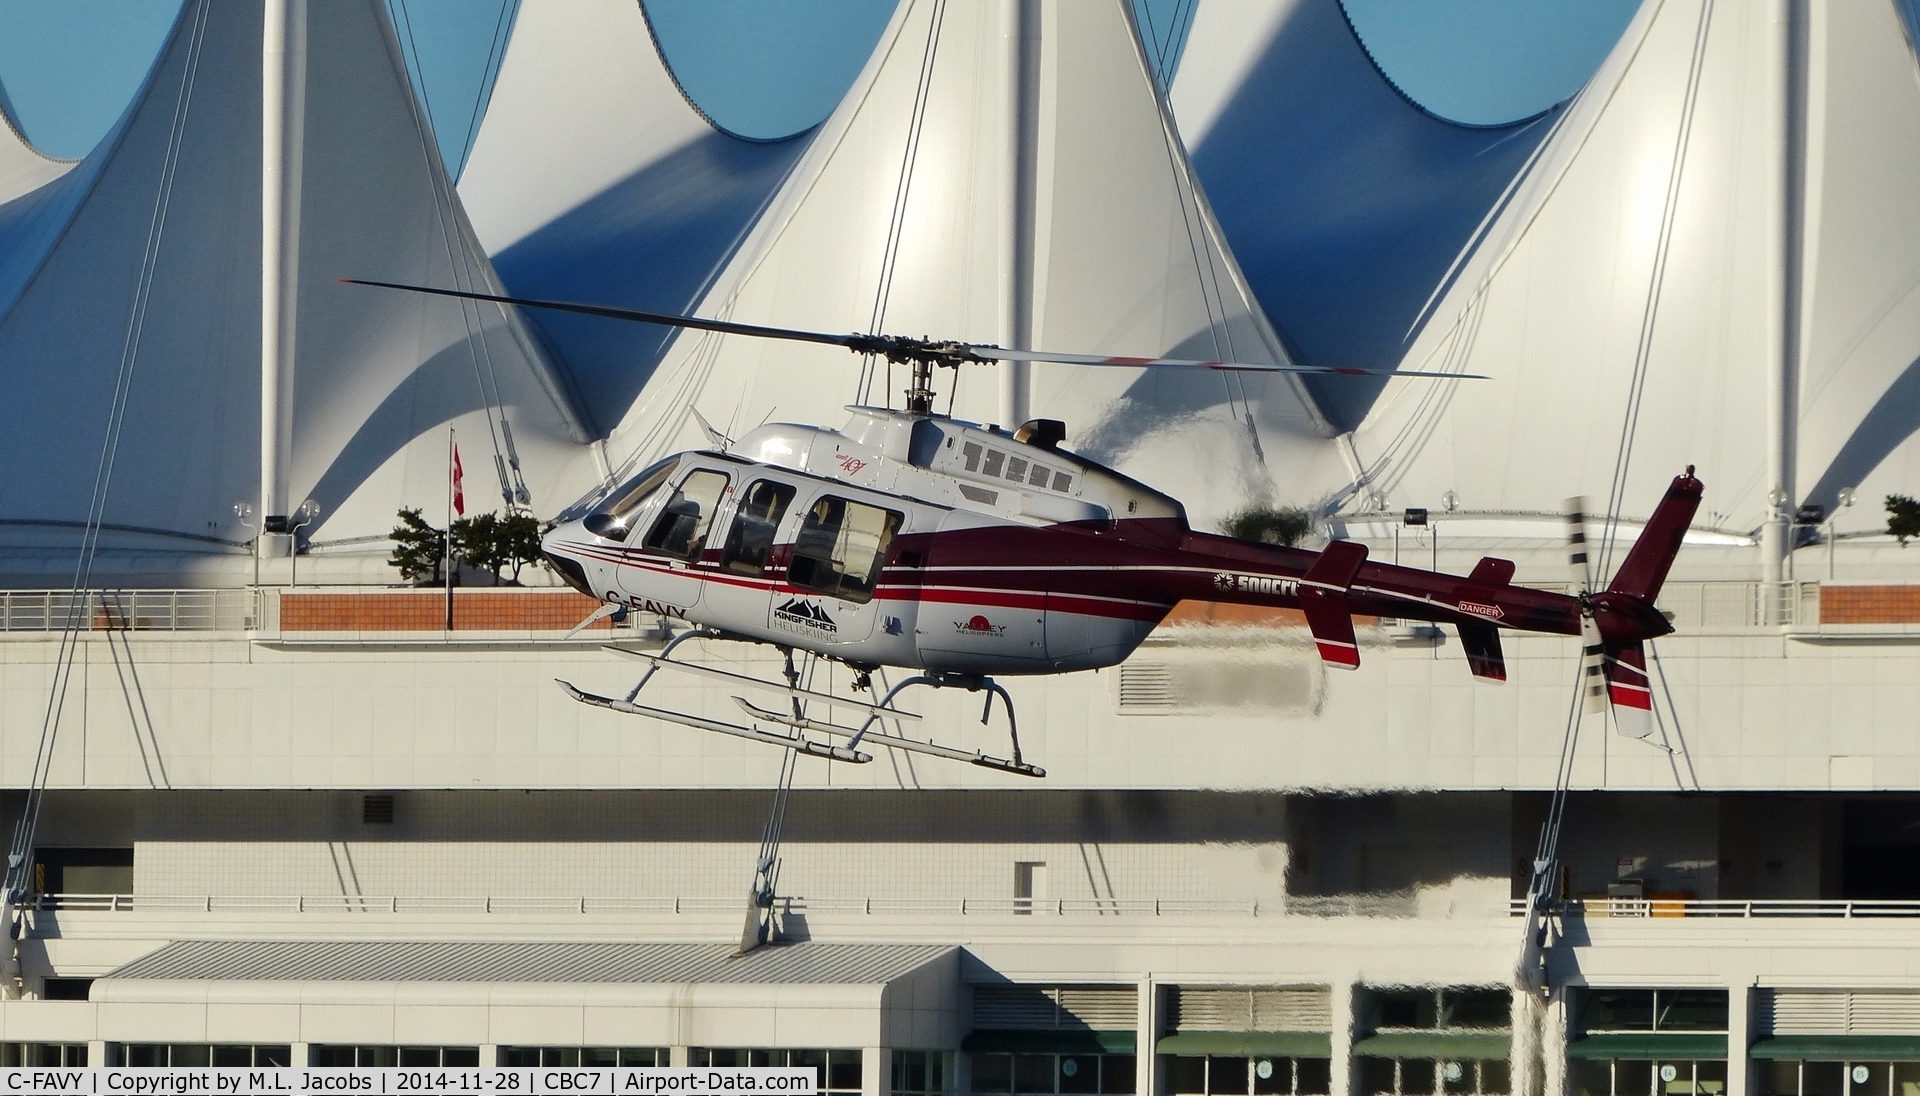 C-FAVY, 1997 Bell 407 C/N 53120, Valley Helicopters Bell 407 just arriving at Vancouver Harbour Heliport.